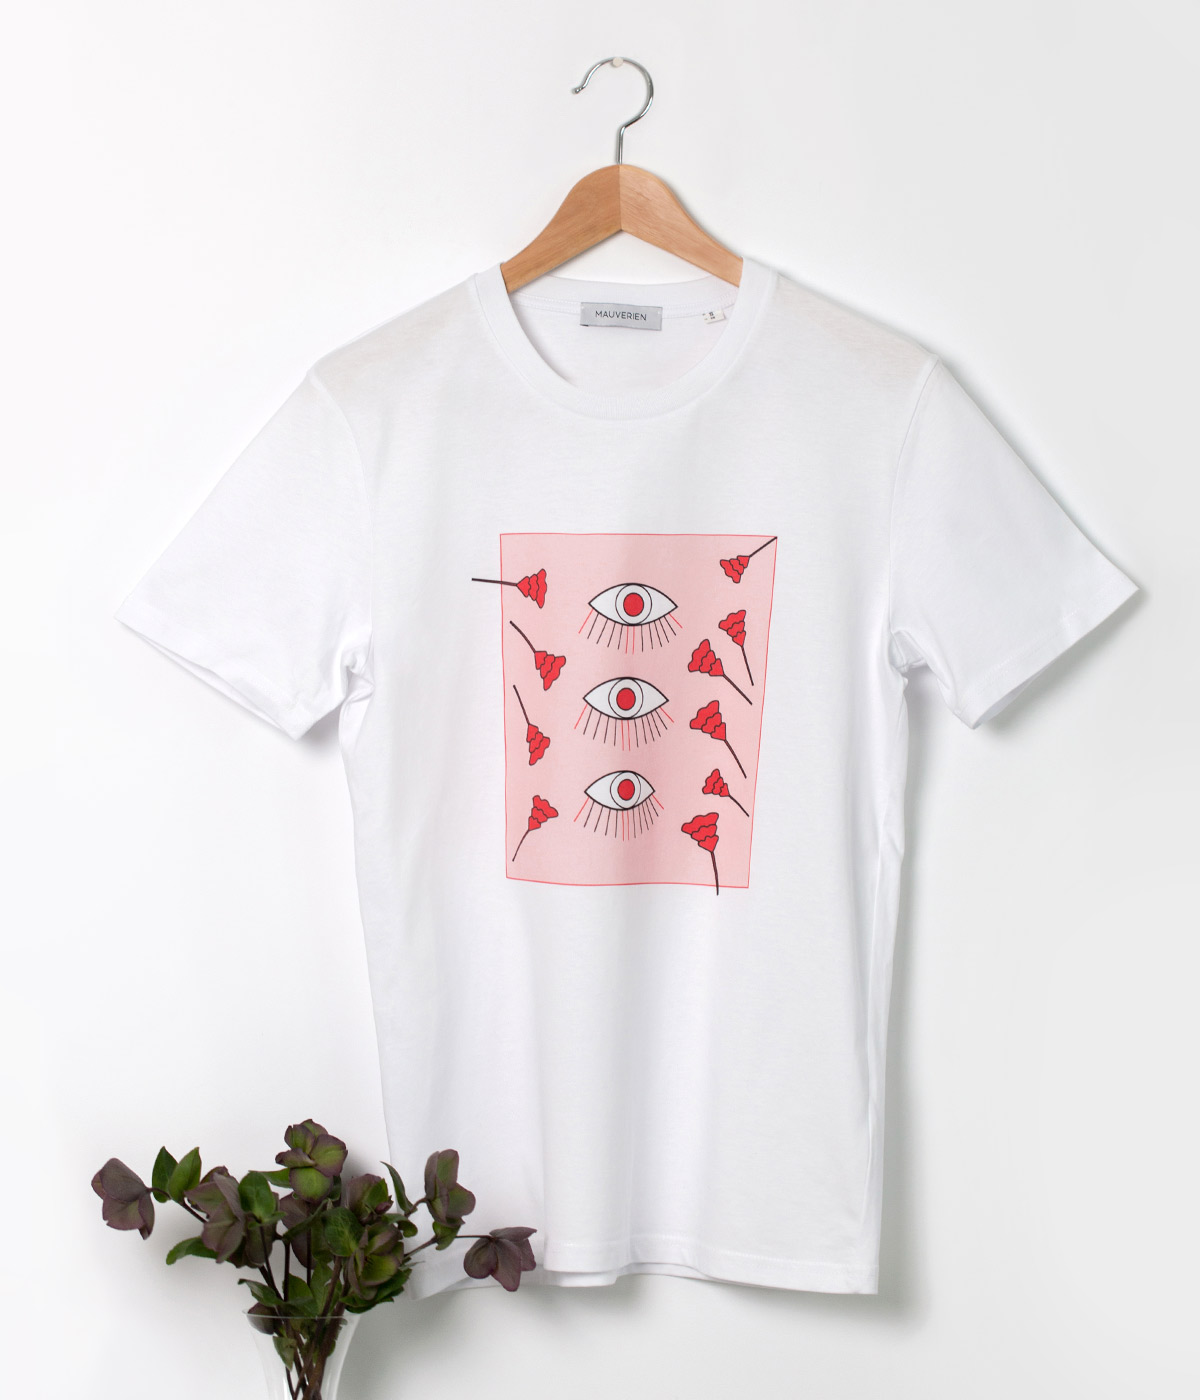 Front of white cotton t-shirt printed with 3 eyes & floral motifs in red and pink.